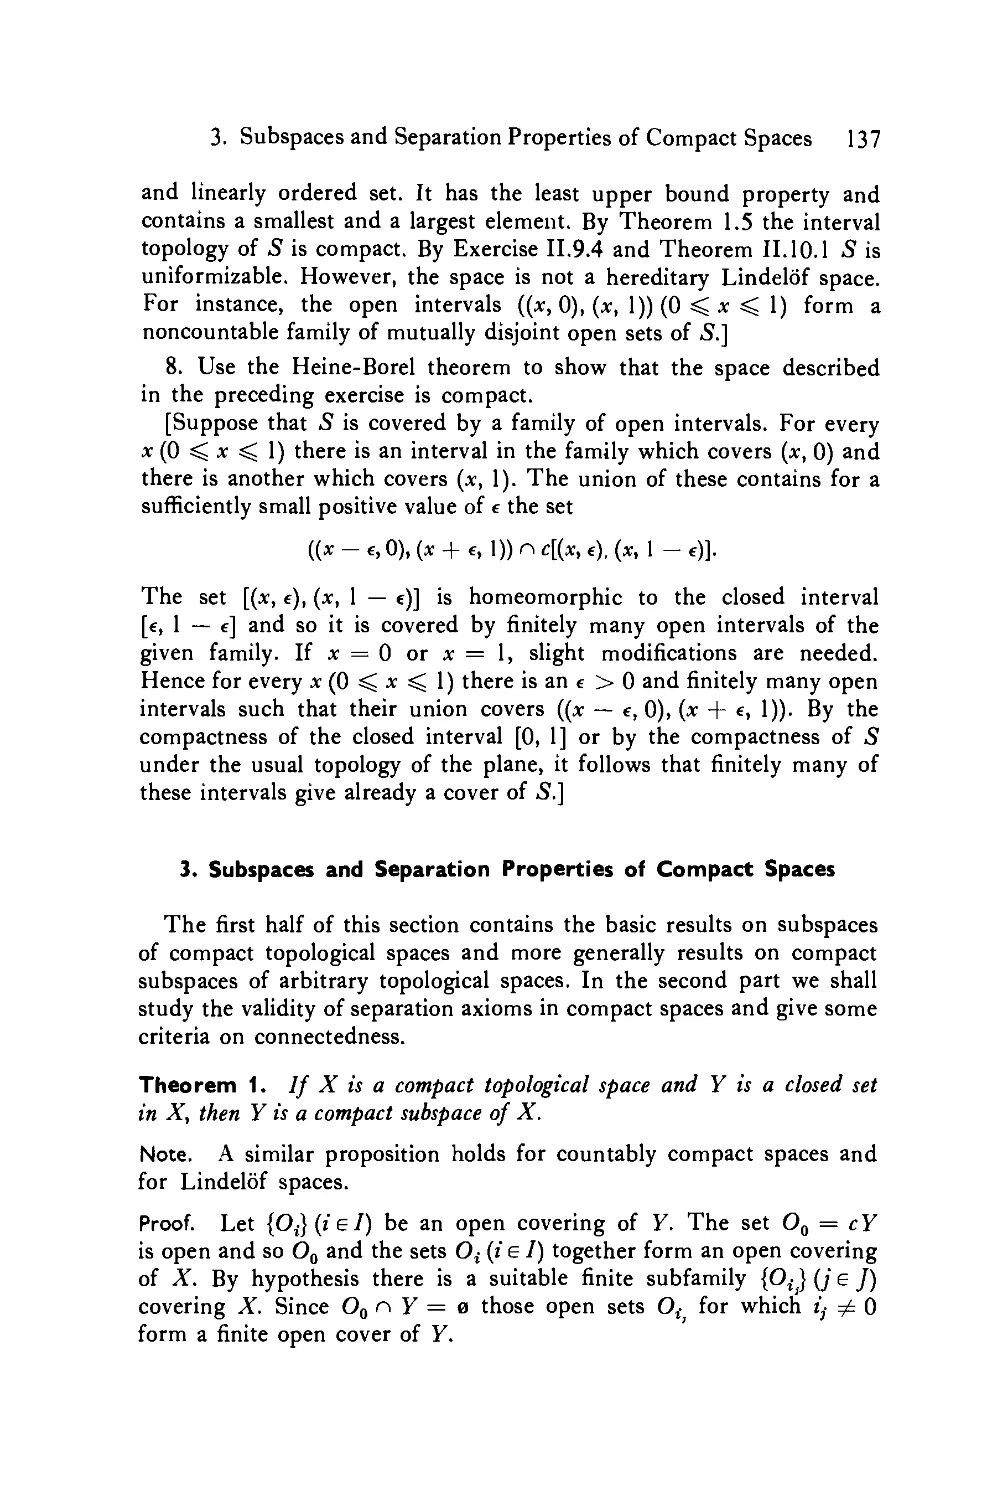 3. subspaces and separation properties of Compact Spaces